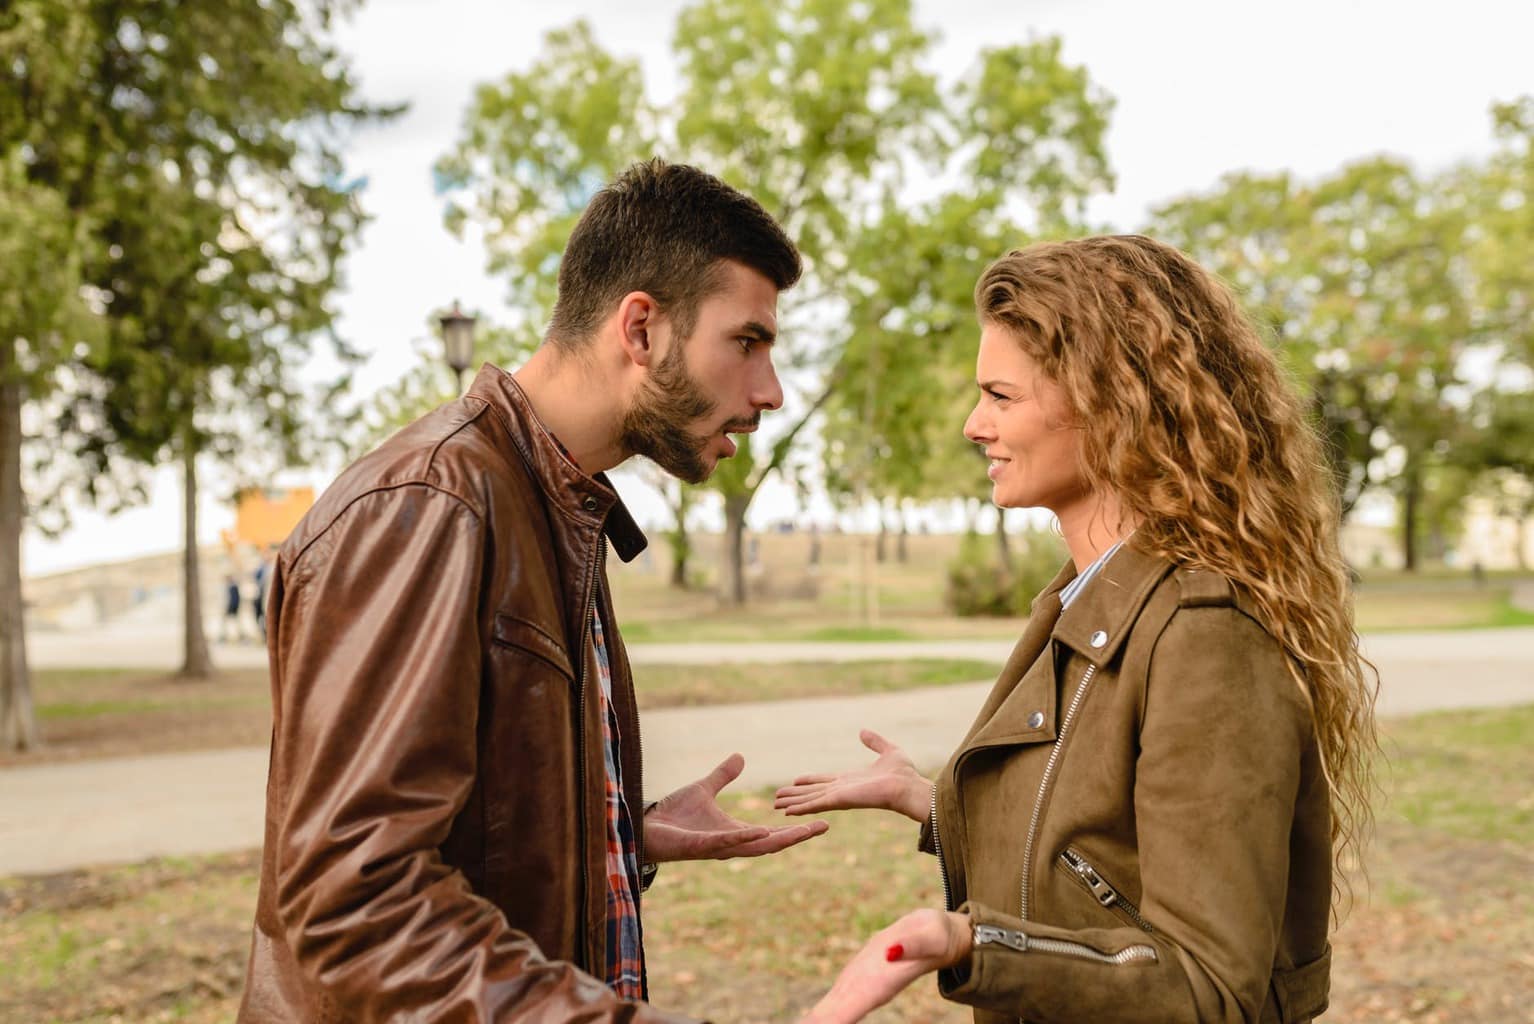 Man and a woman fighting in a park, wearing brown coats